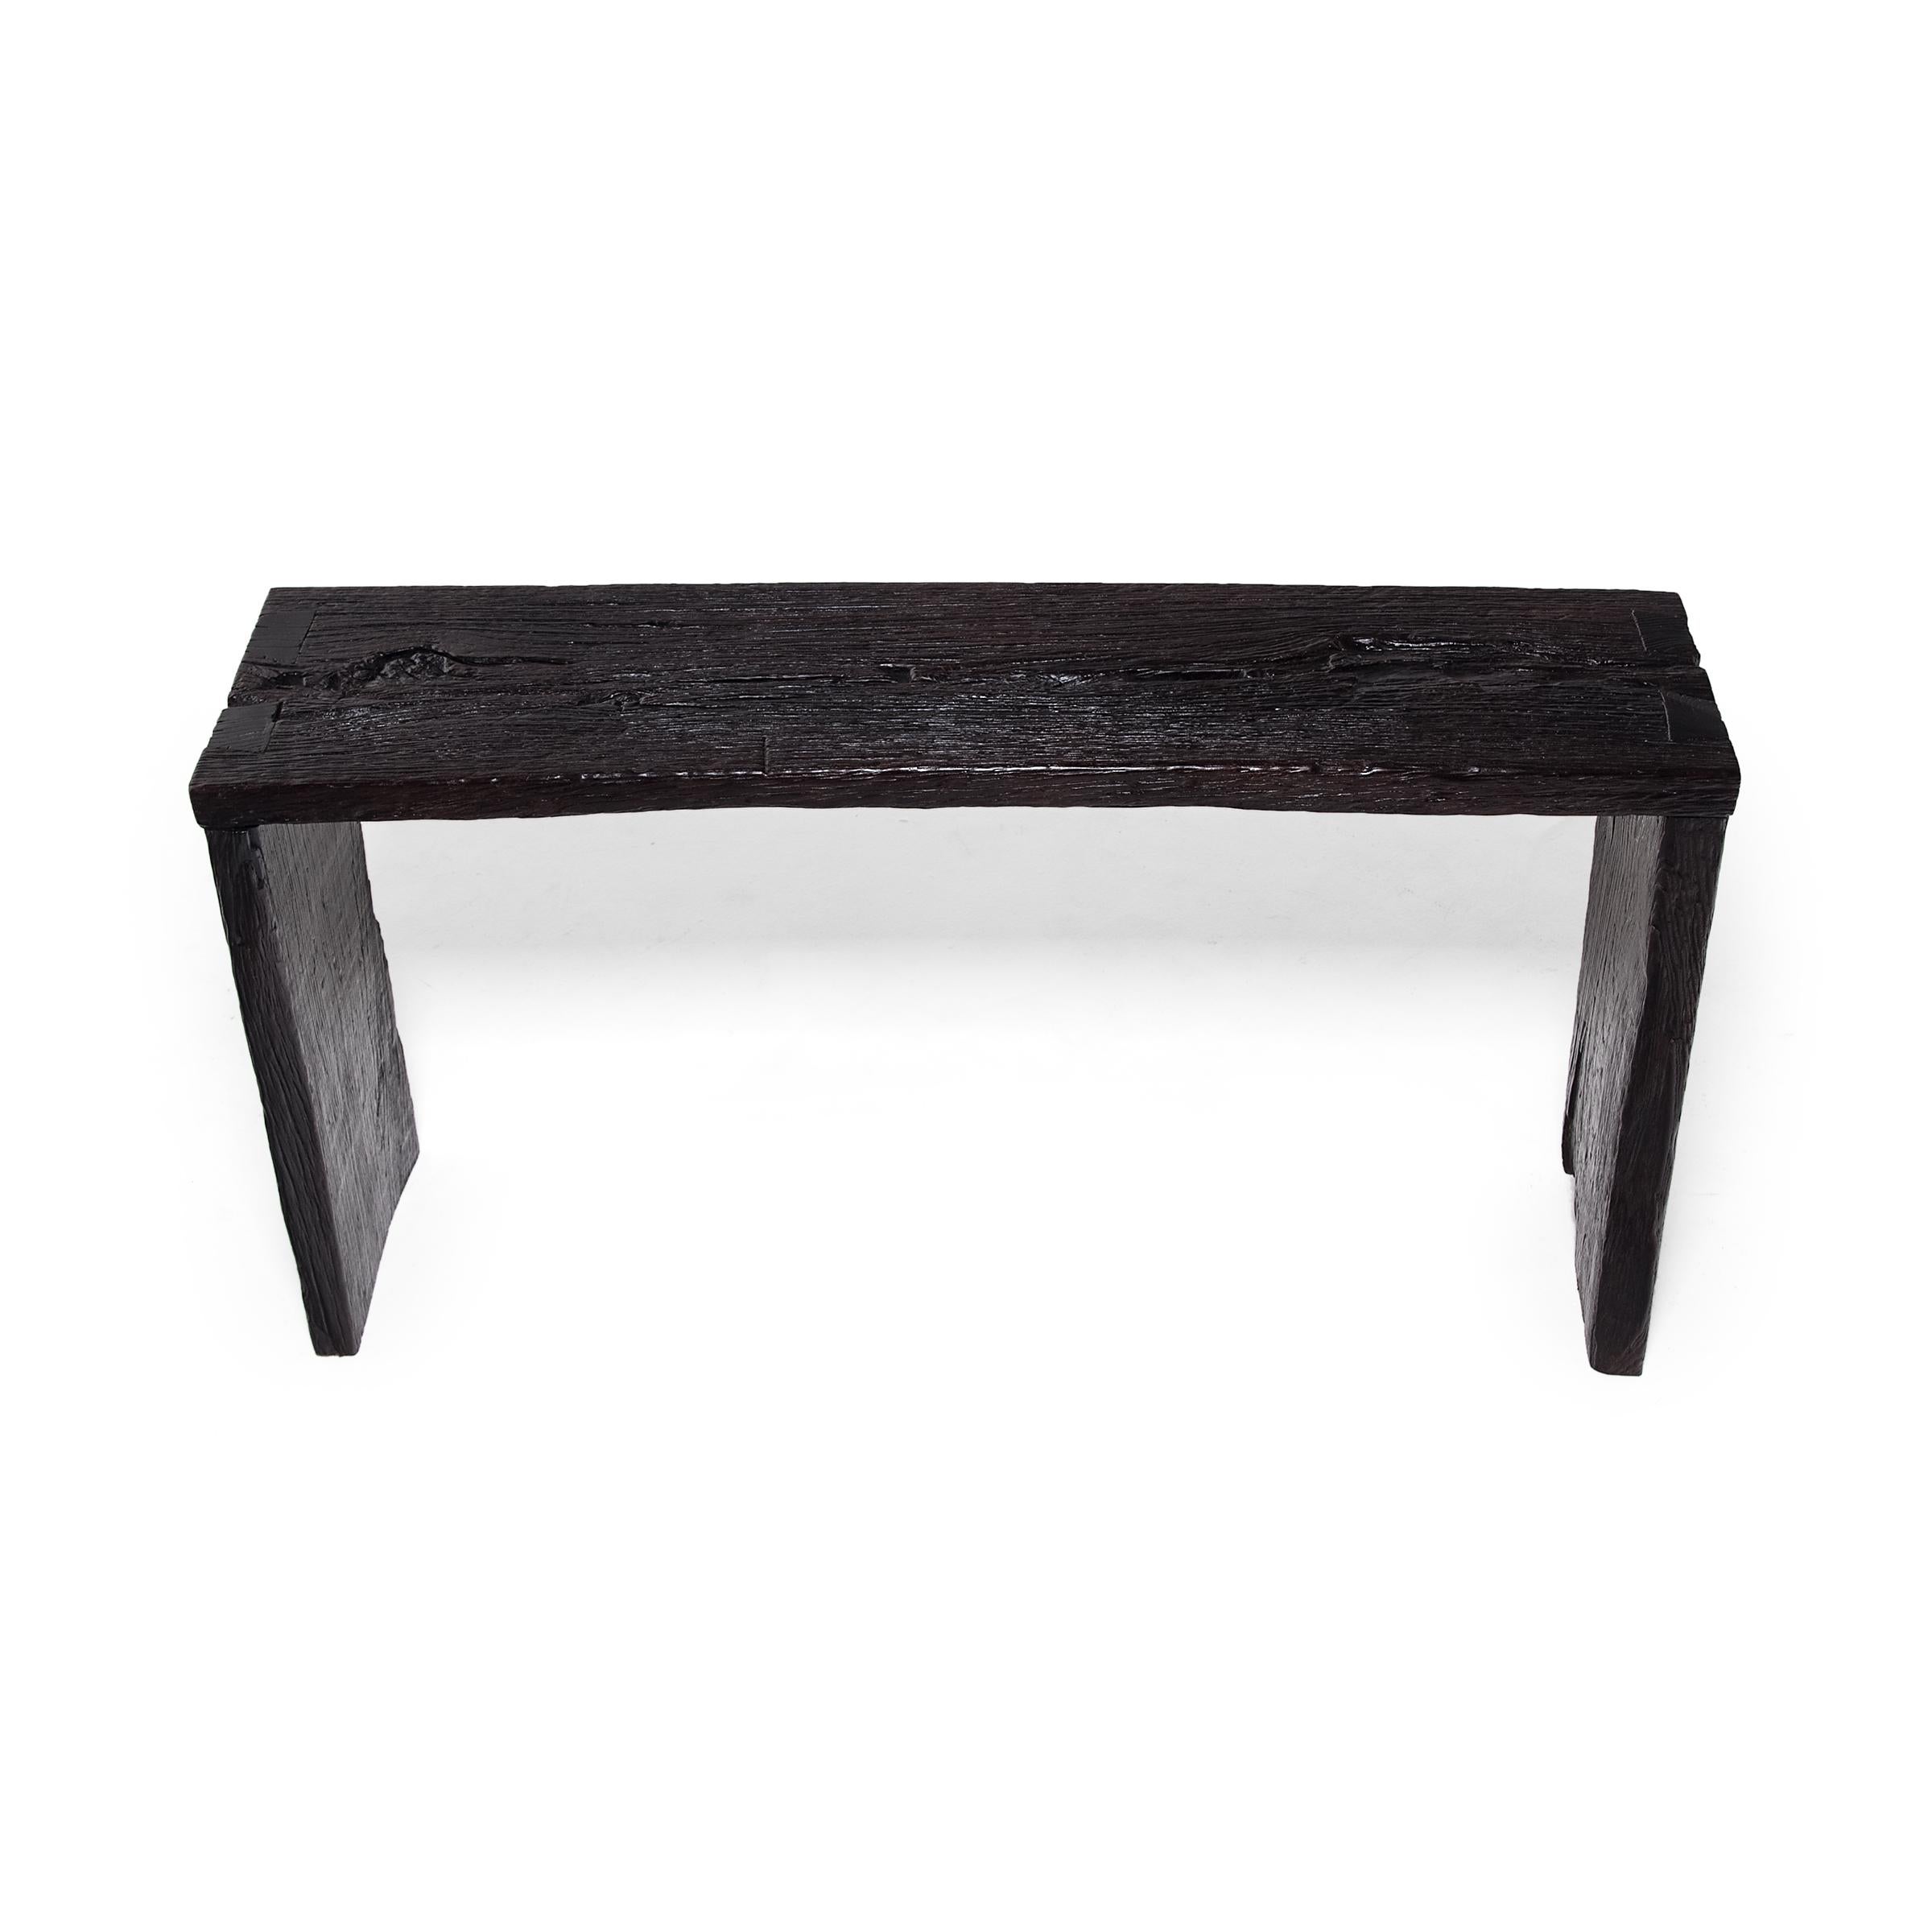 Chinese Dark Reclaimed Elm Waterfall Console Table